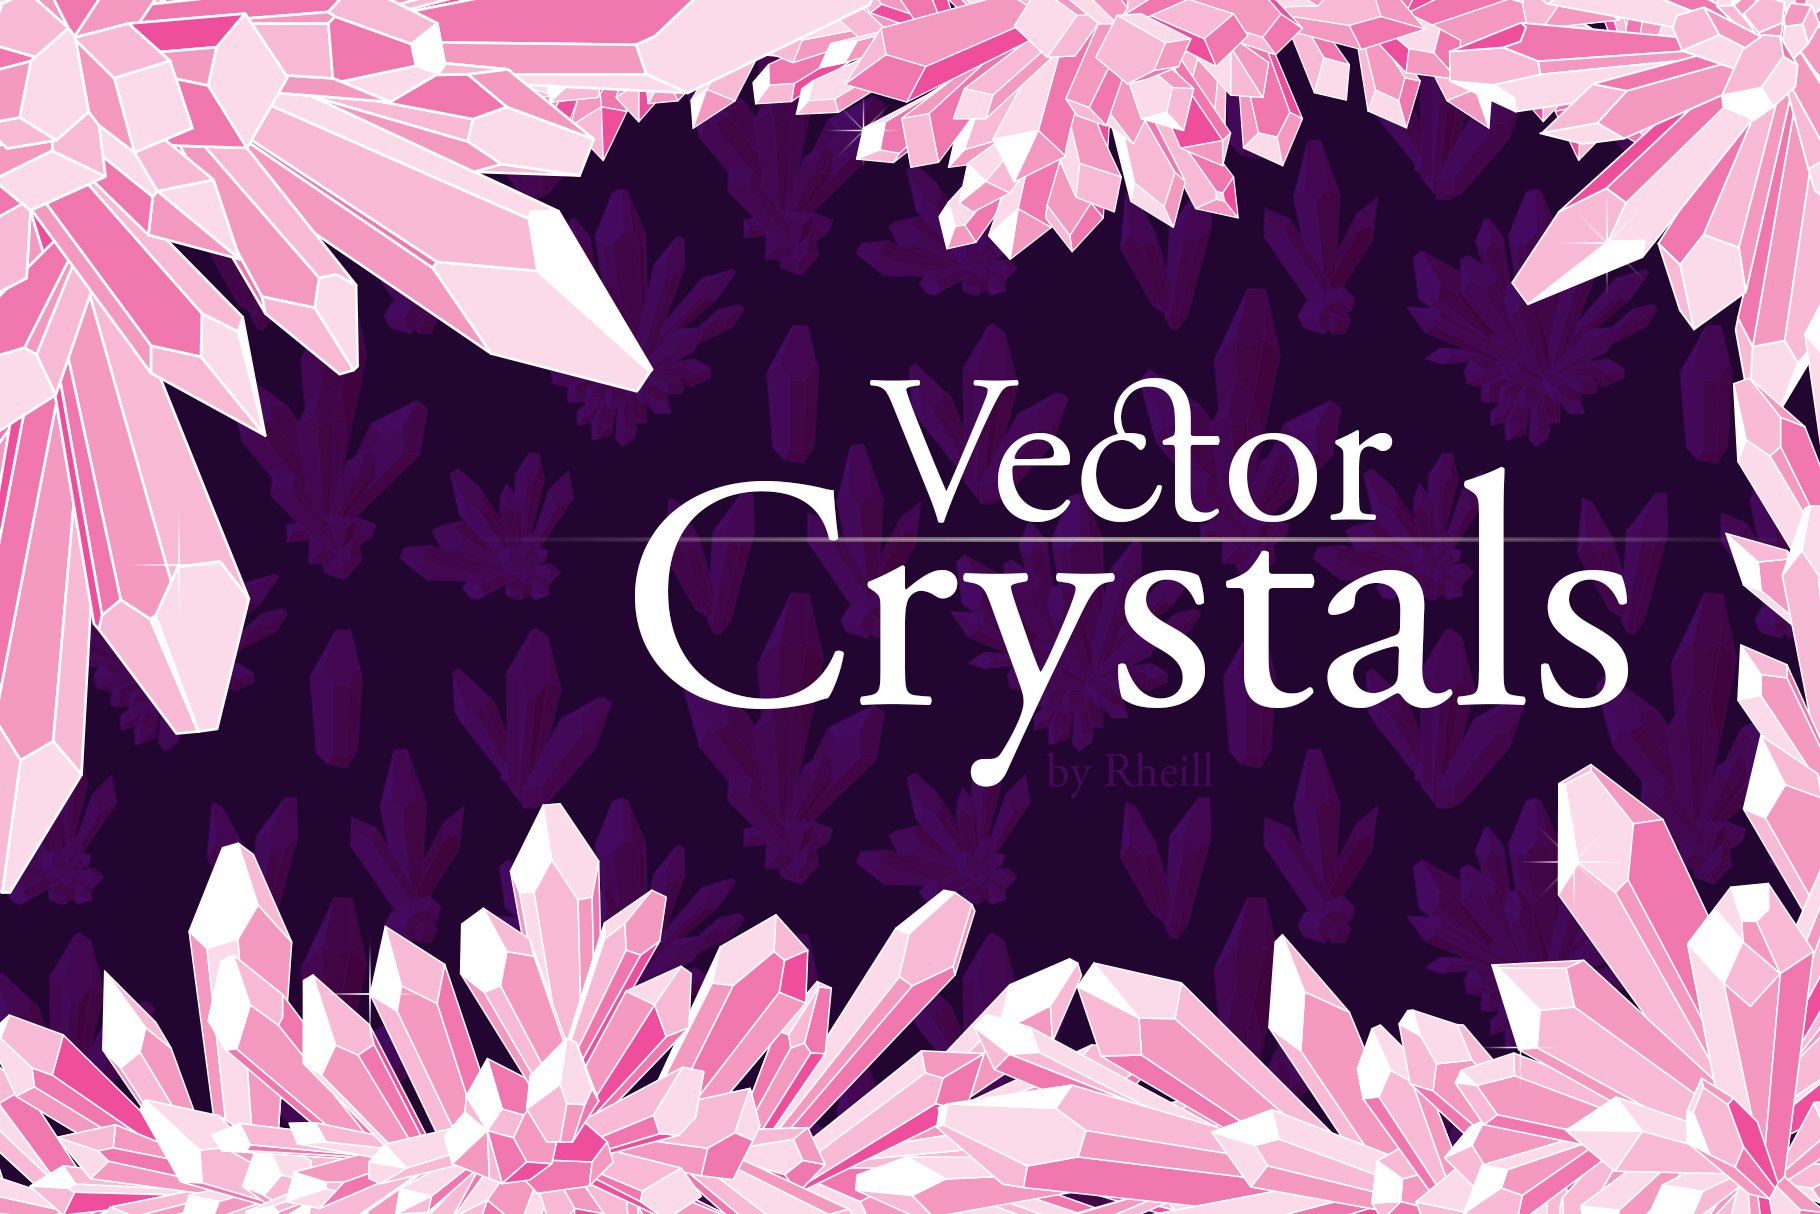 Vector Crystals cover image.